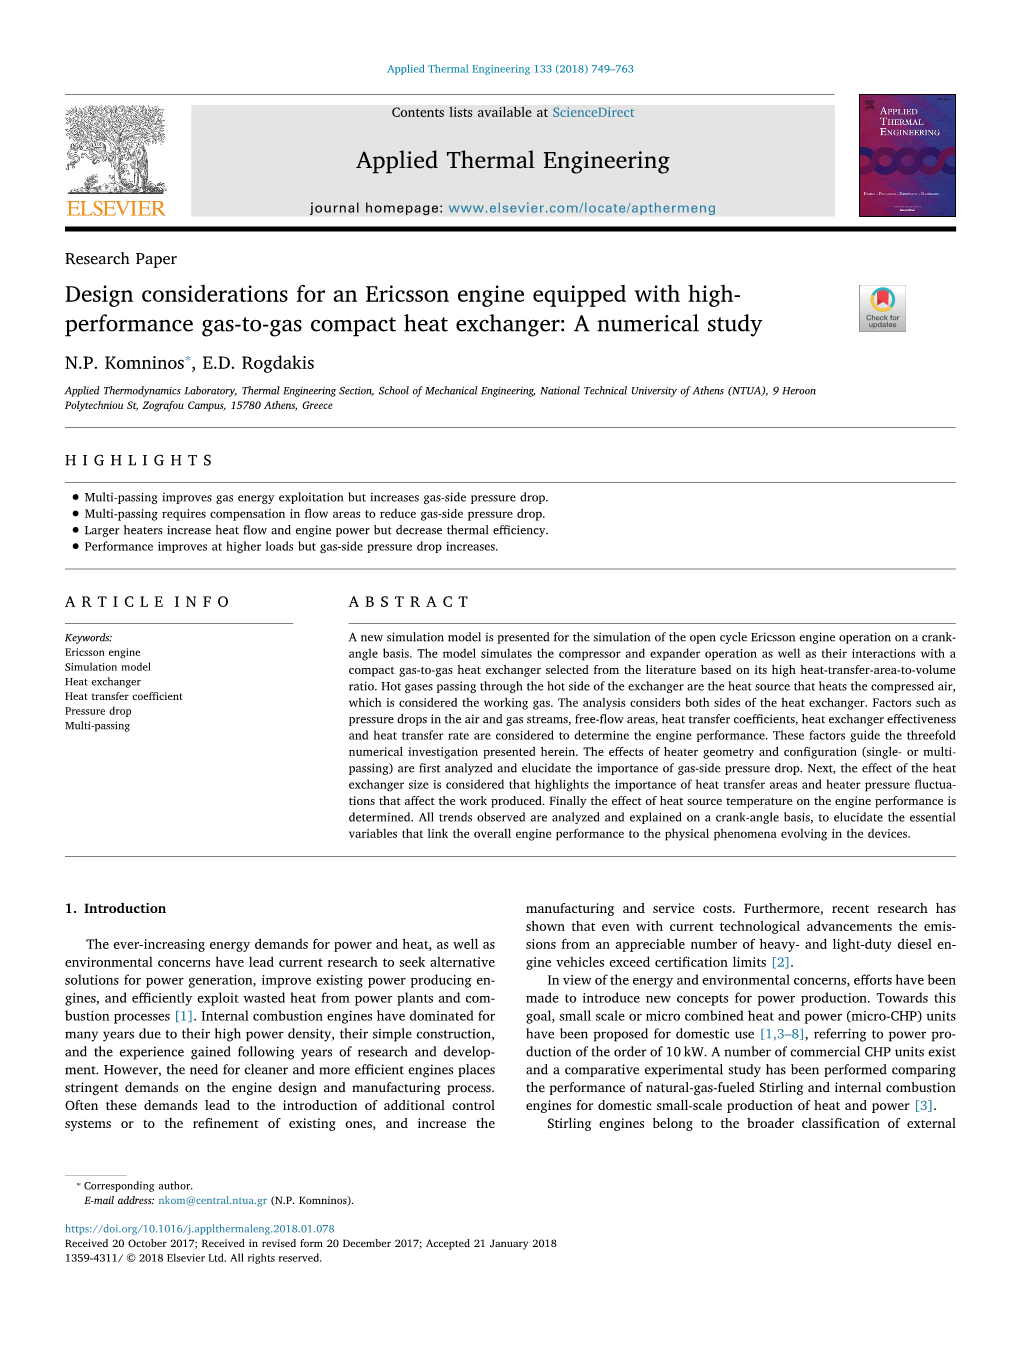 Design Considerations for an Ericsson Engine Equipped with High- T Performance Gas-To-Gas Compact Heat Exchanger: a Numerical Study ⁎ N.P